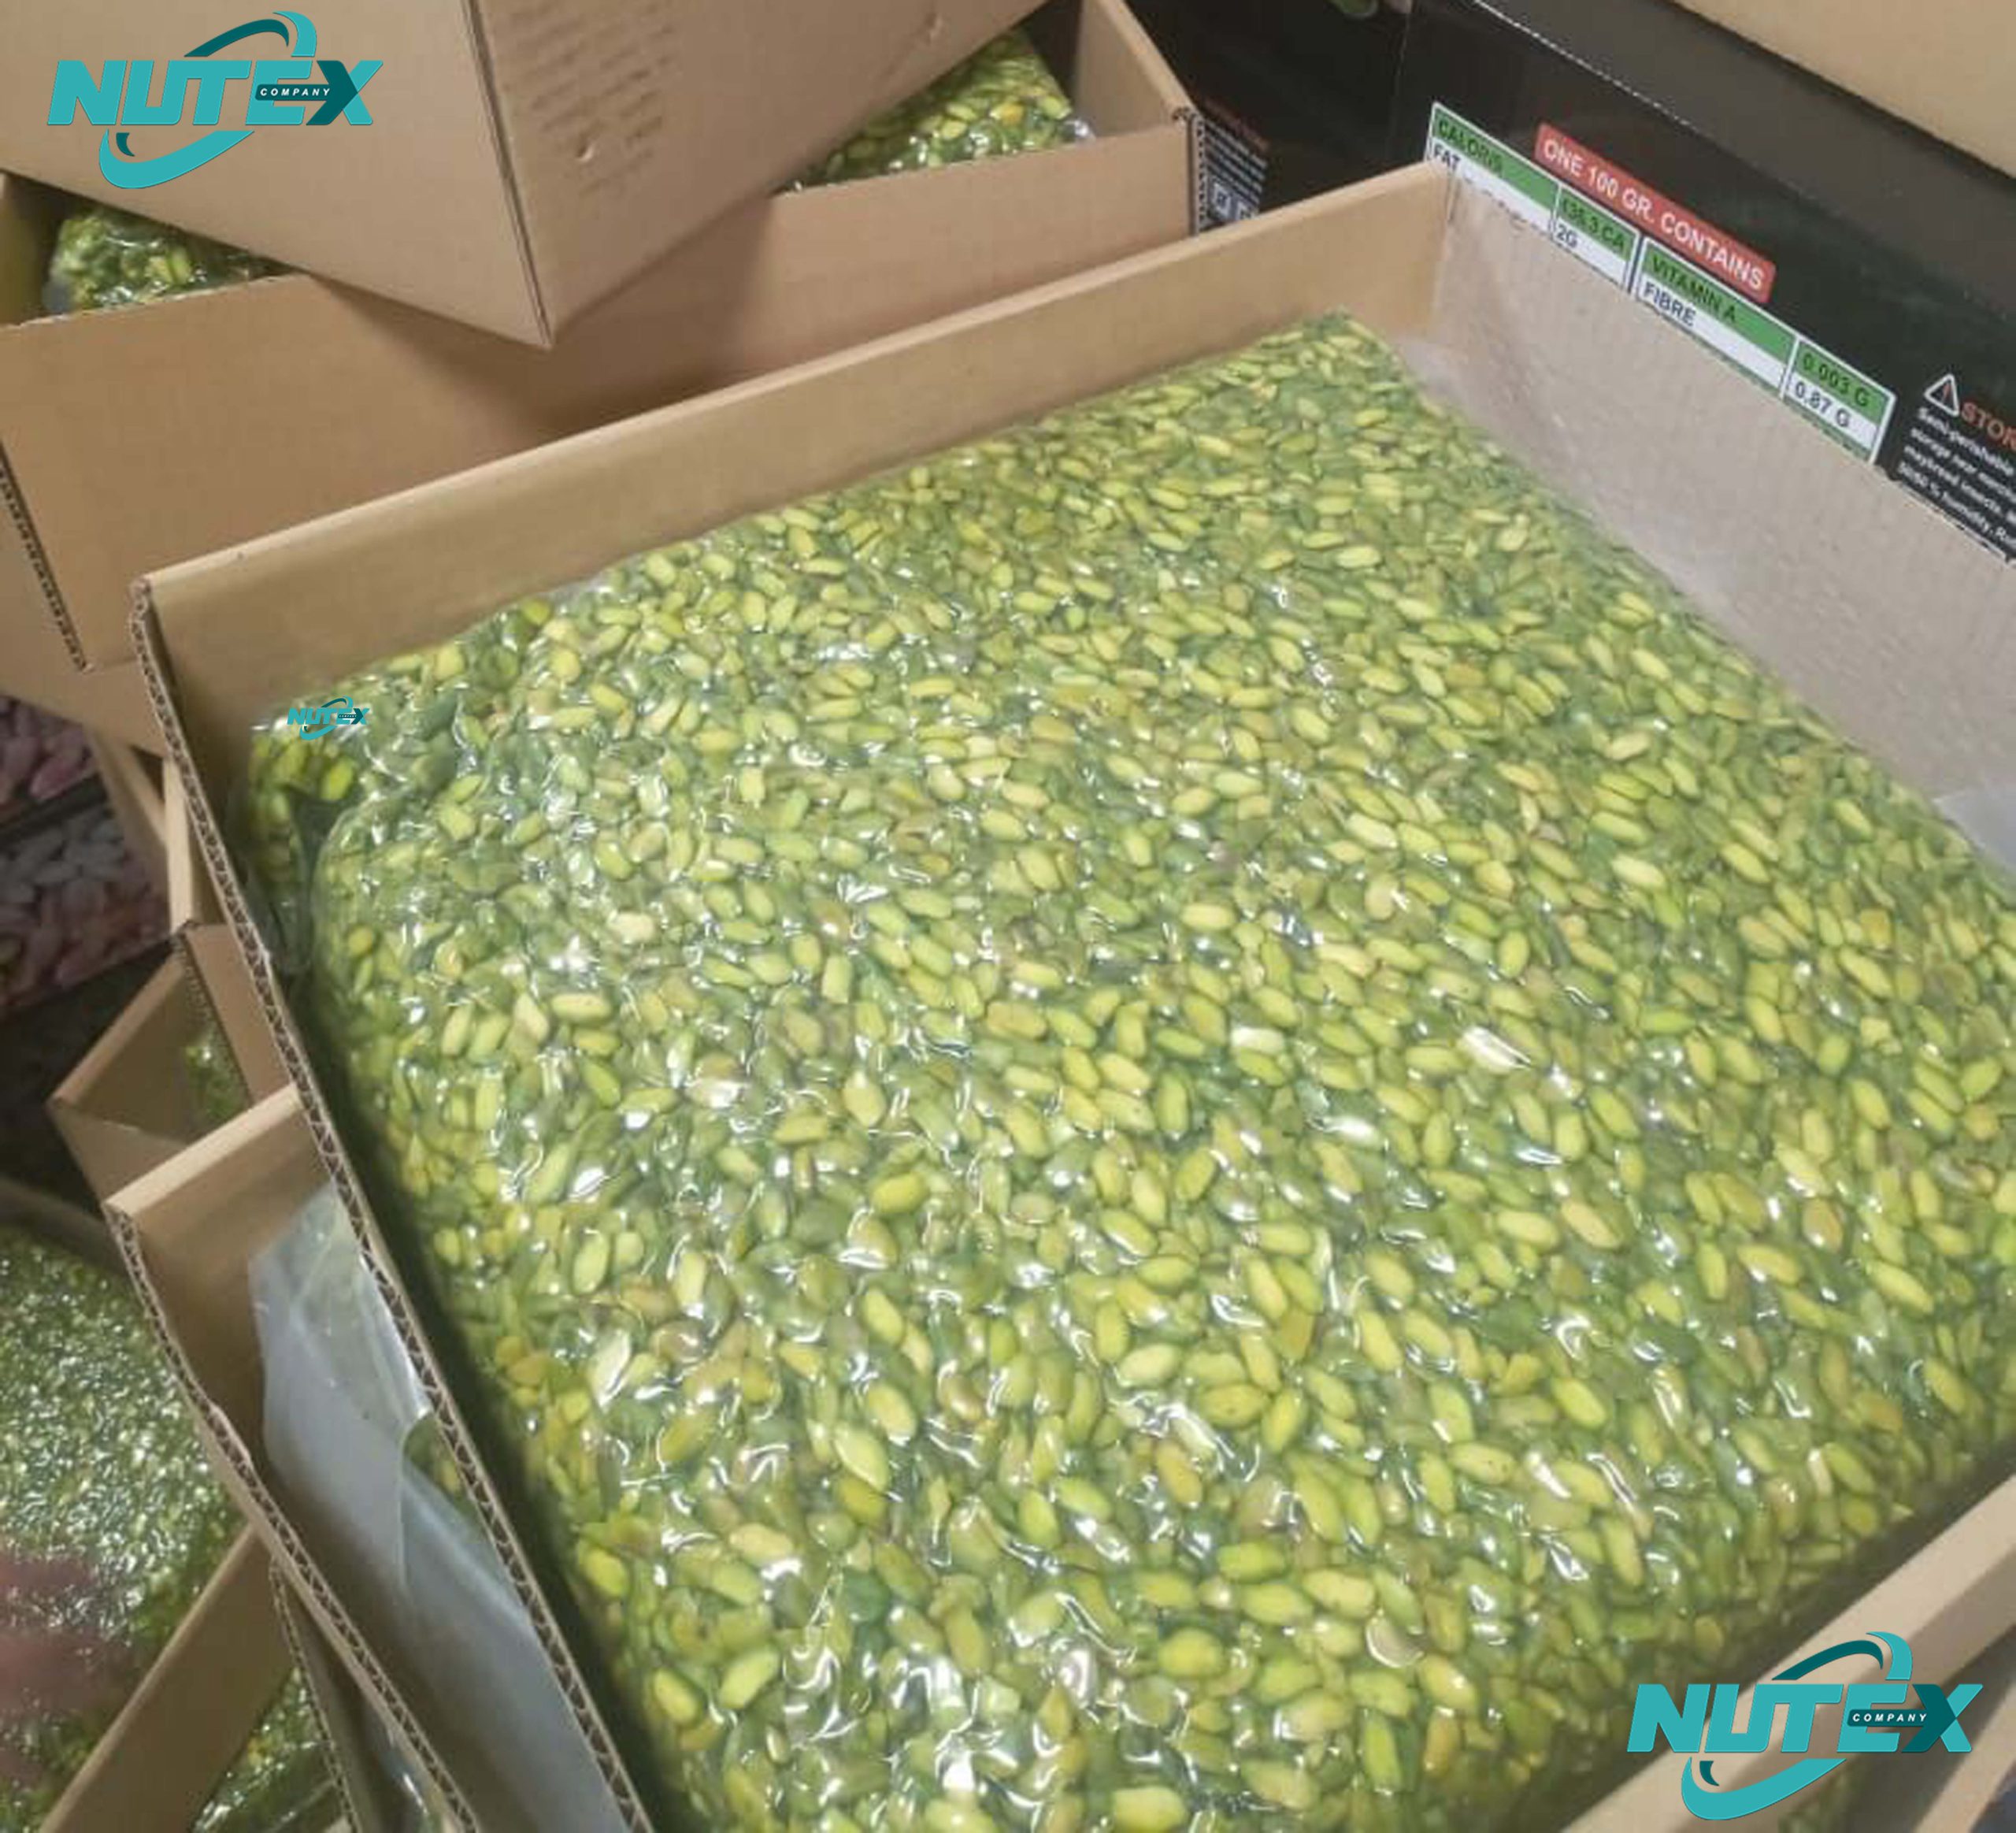 Buy green pistachio kernels from the manufacturer_Recognizing the best green pistachio kernels for export from Iran_ Nutex Pistachio Company